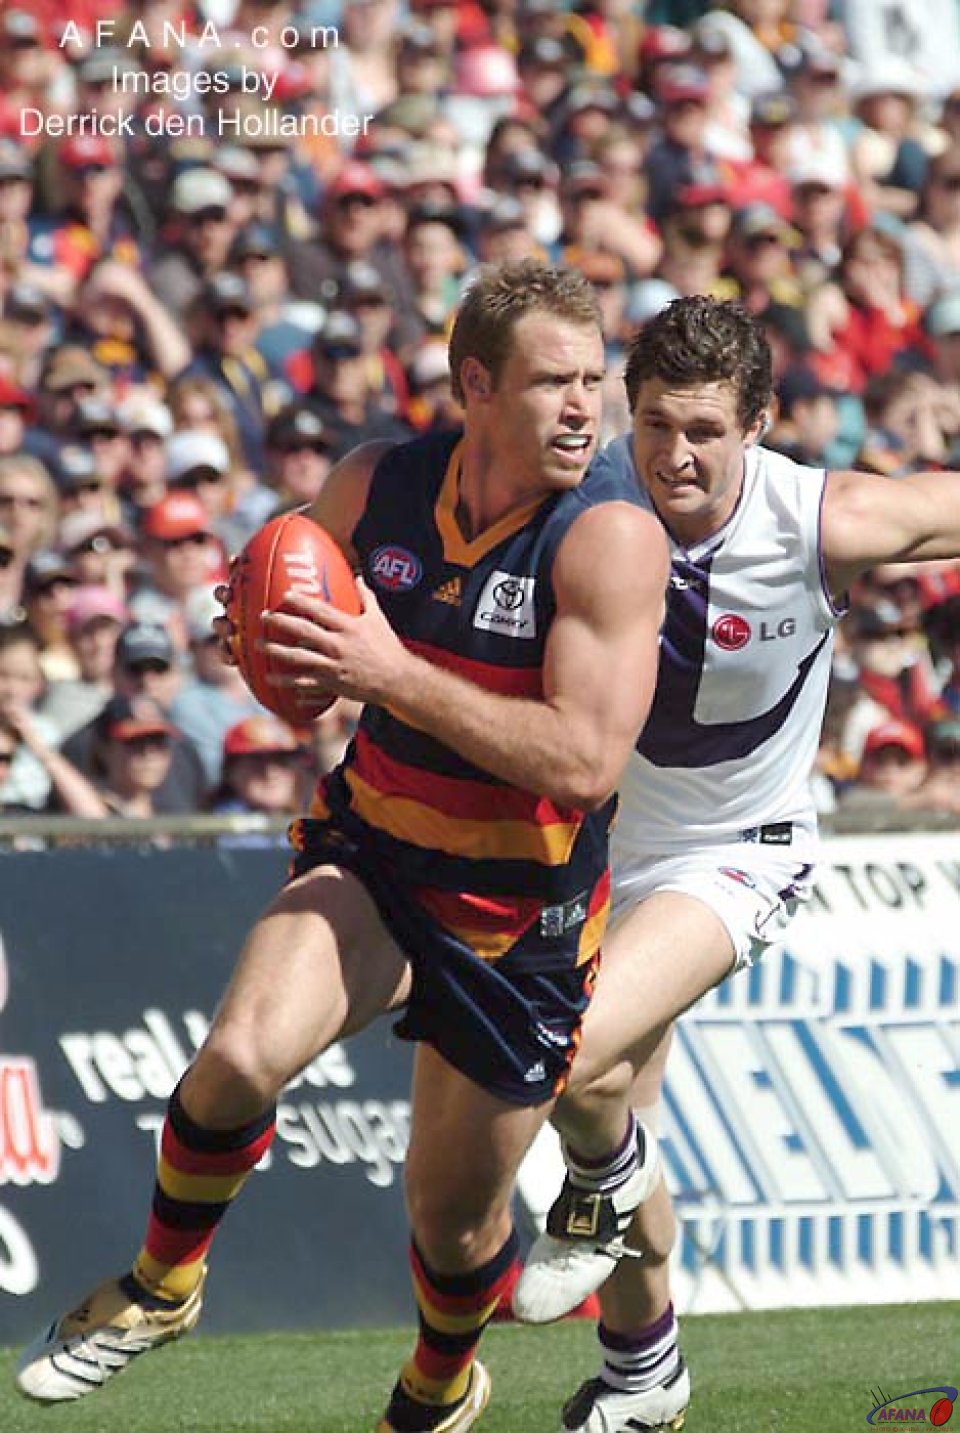 [b]Ben Hudson propells forward on the rebound from the Crows defence[/b]